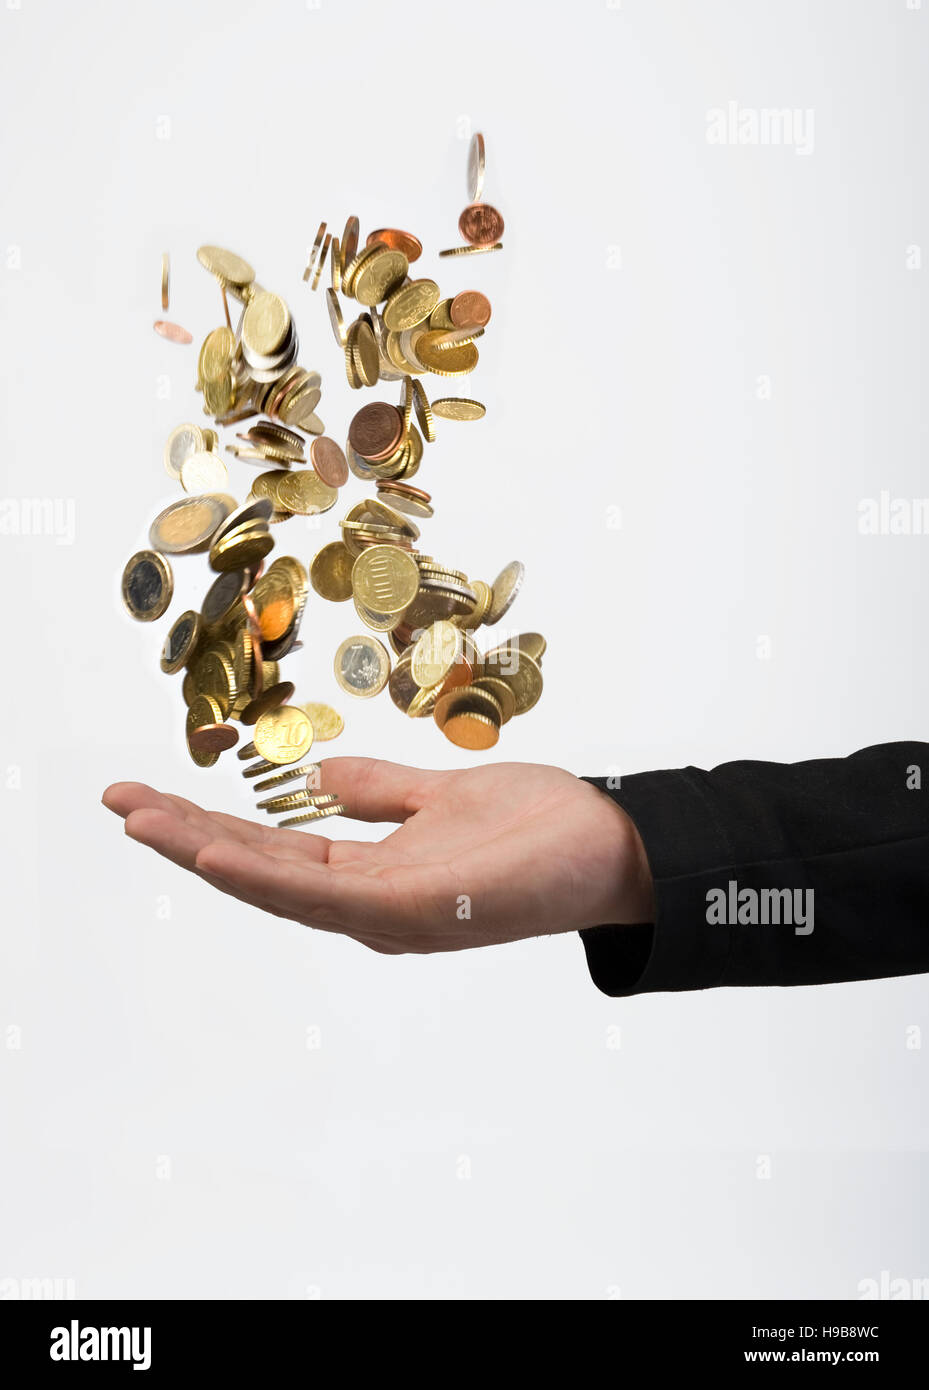 Hand throwing coins Stock Photo